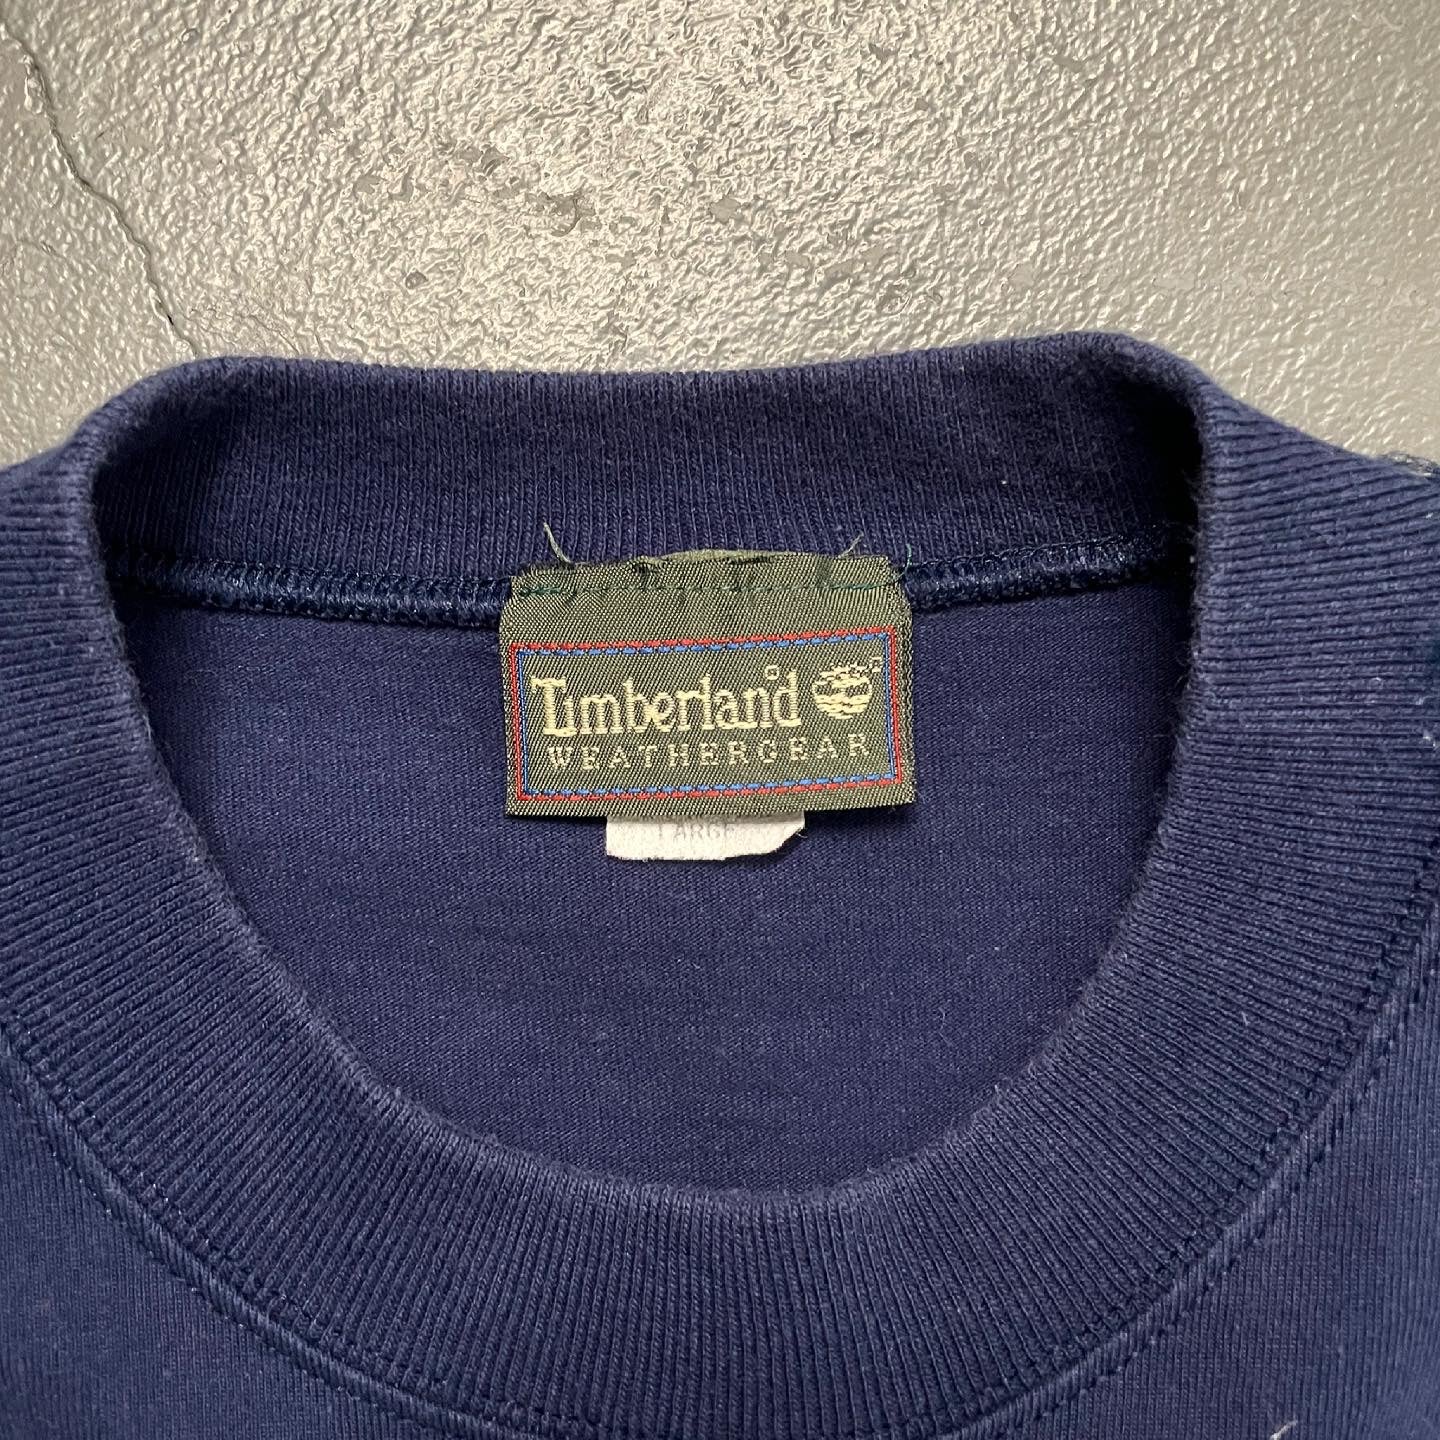 Timberland Weather Gear S/S Tee